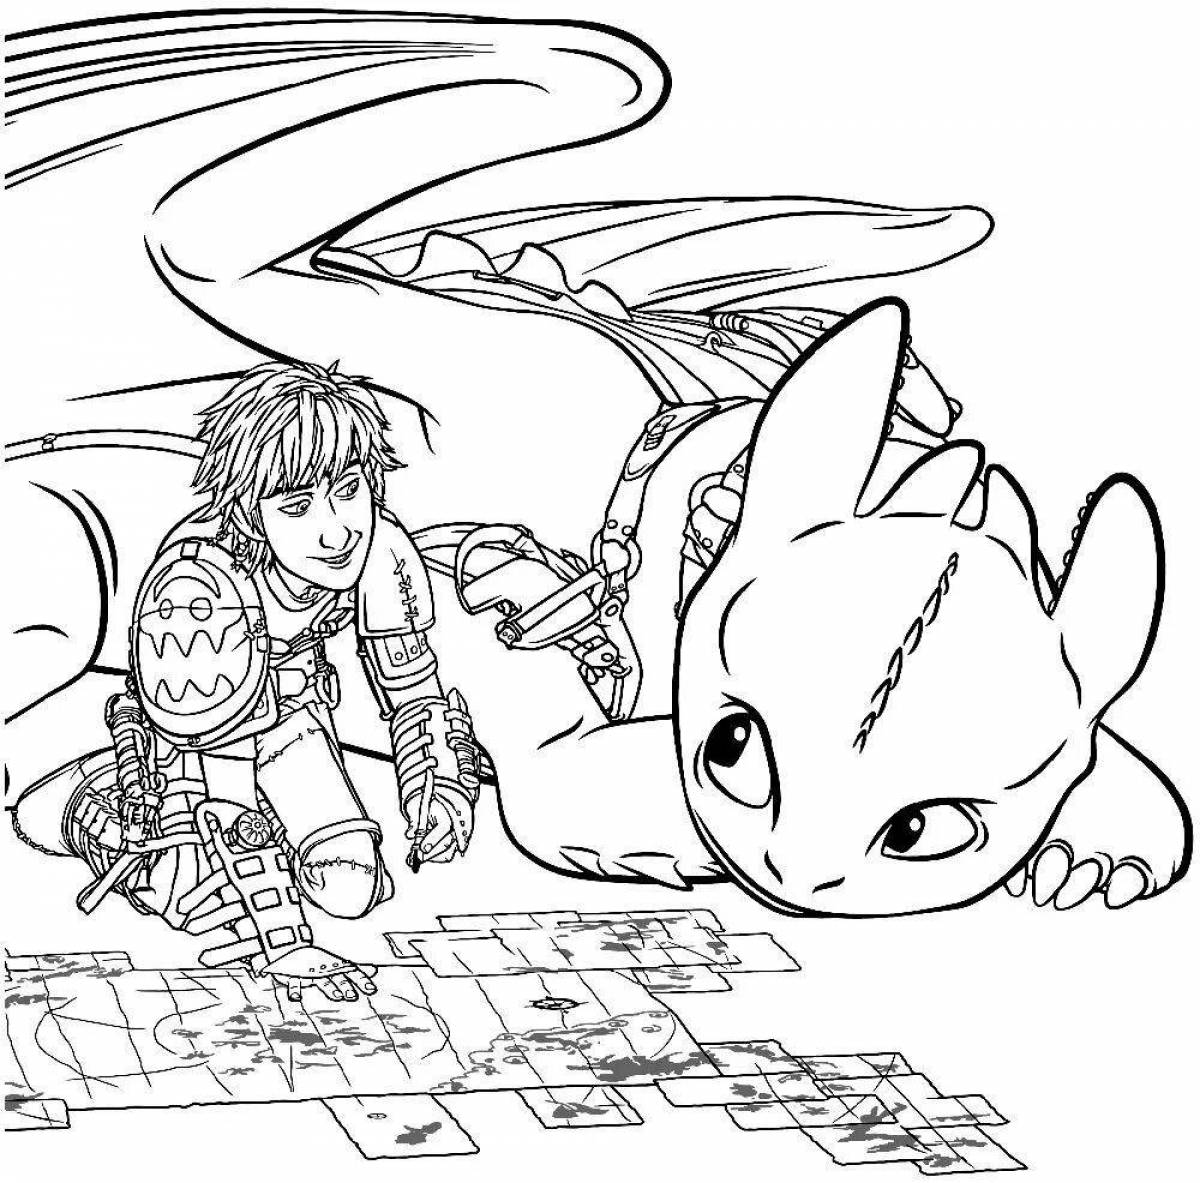 Coloring how to train your dragon 2